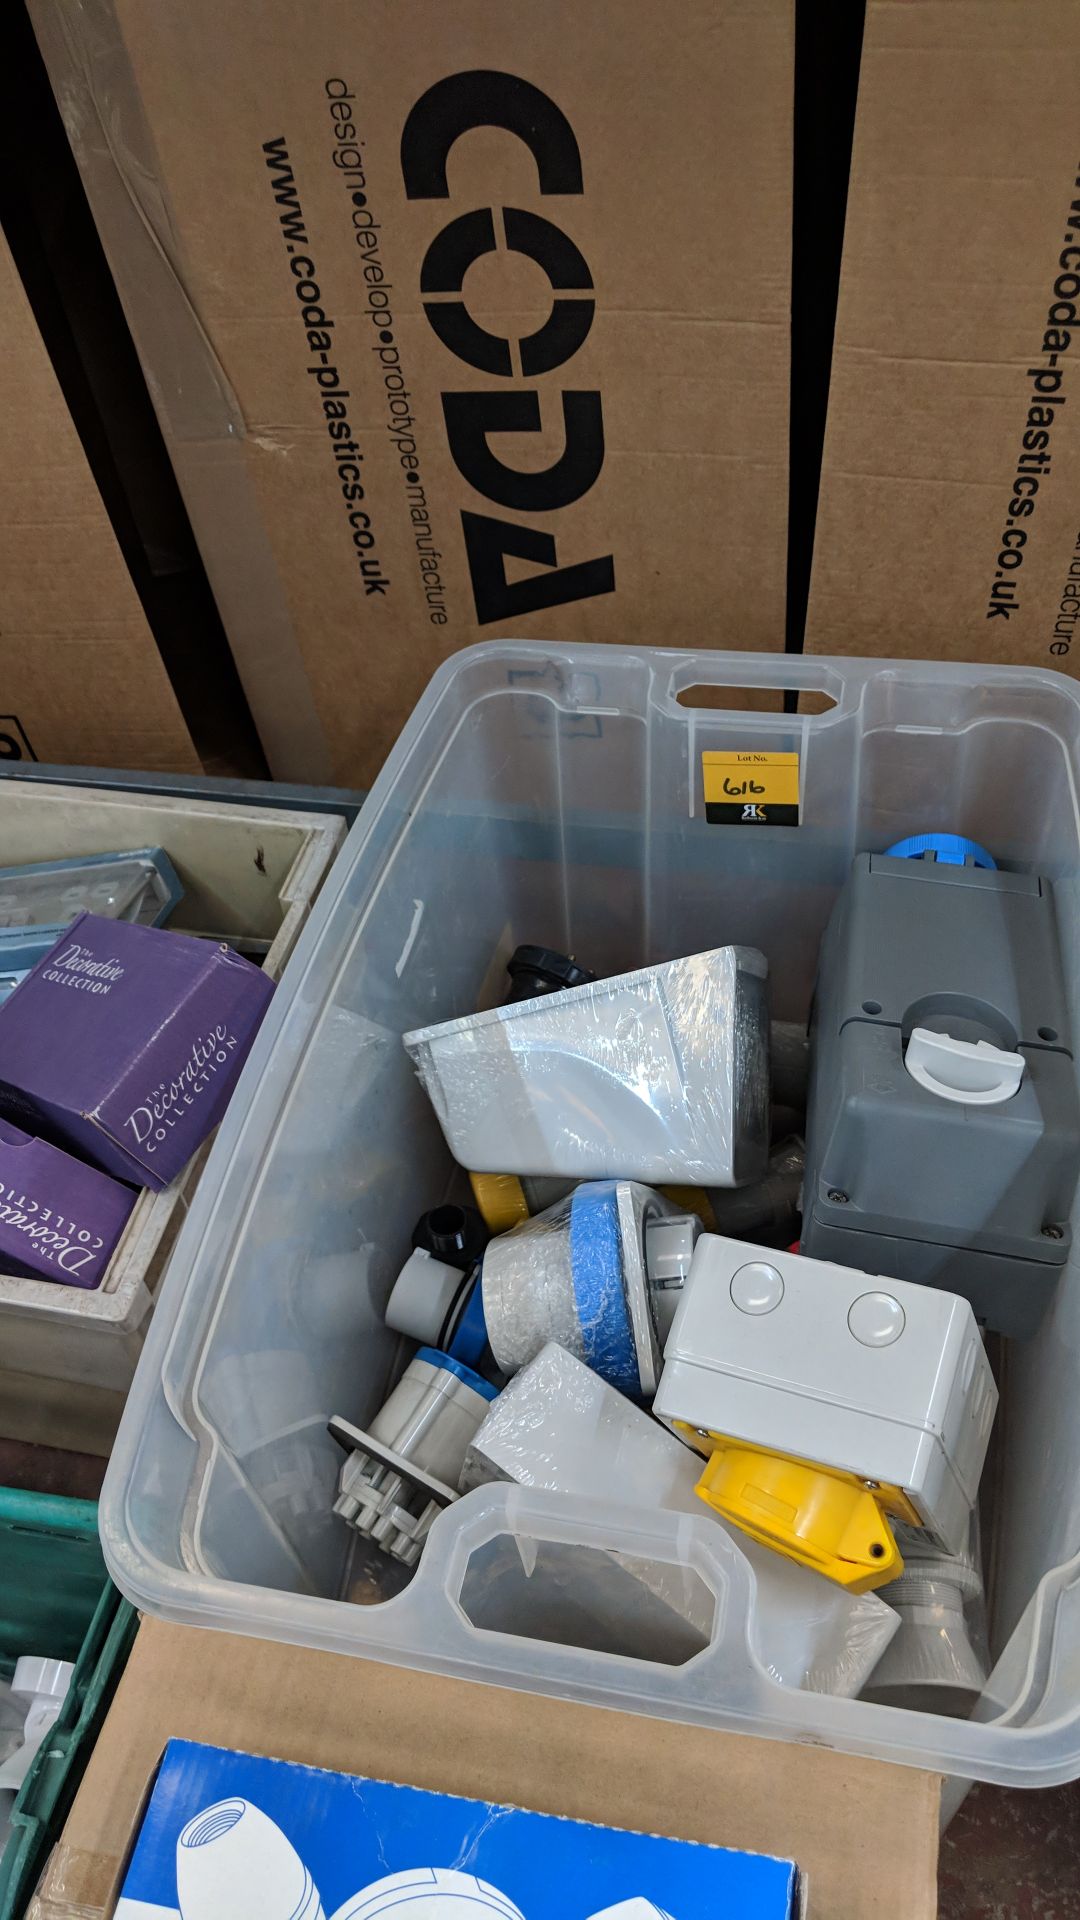 Contents of a crate of heavy-duty sockets and related items - crate excluded The vast majority of